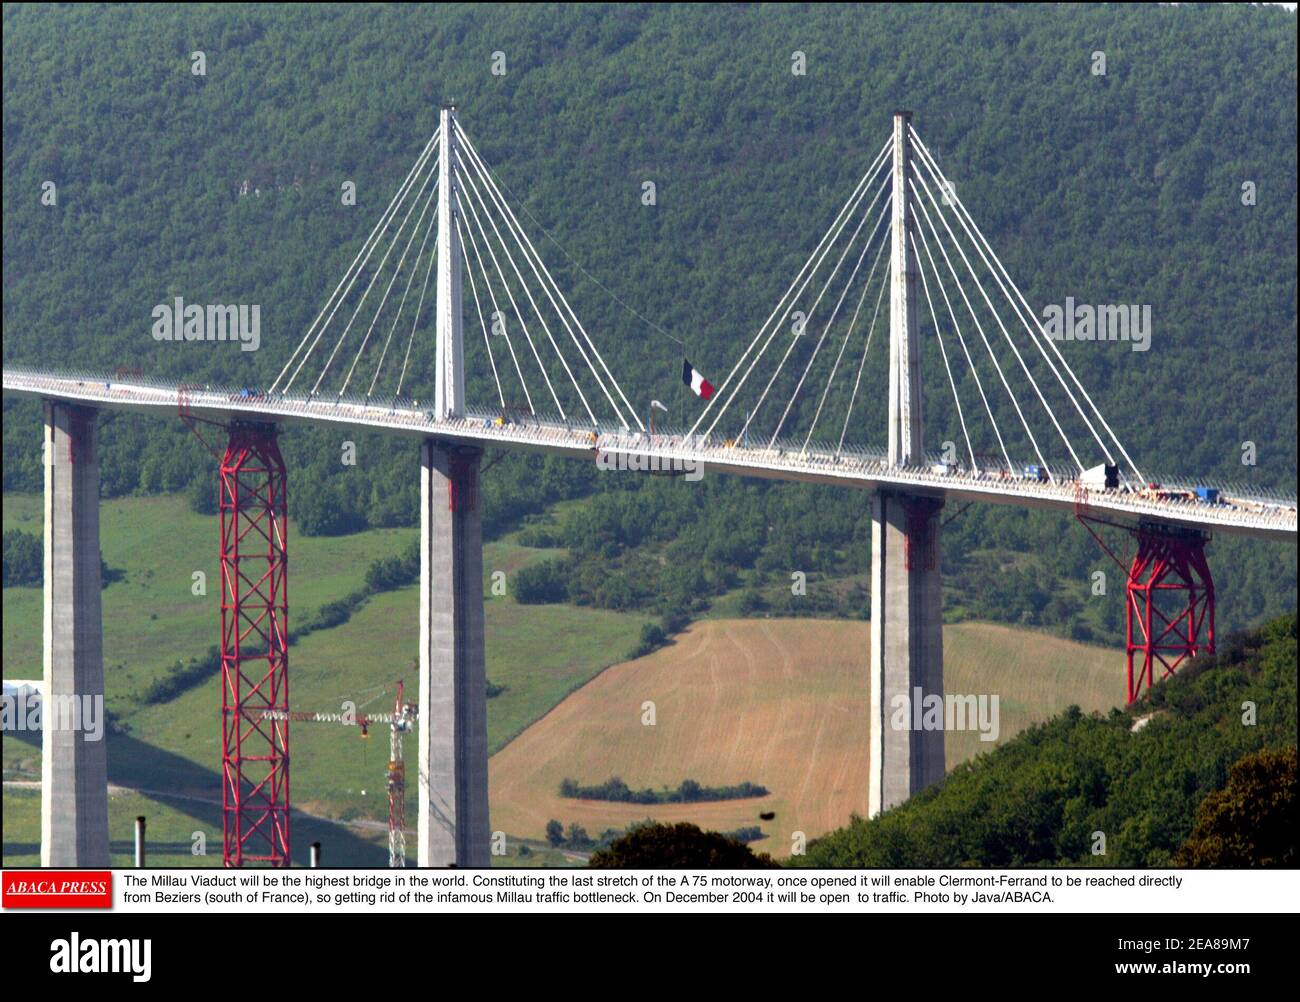 The Millau Viaduct will be the highest bridge in the world. Constituting the last stretch of the A 75 motorway, once opened it will enable Clermont-Ferrand to be reached directly from Beziers (south of France), so getting rid of the infamous Millau traffic bottleneck. On December 2004 it will be open to traffic. Photo by Java/ABACA. Stock Photo